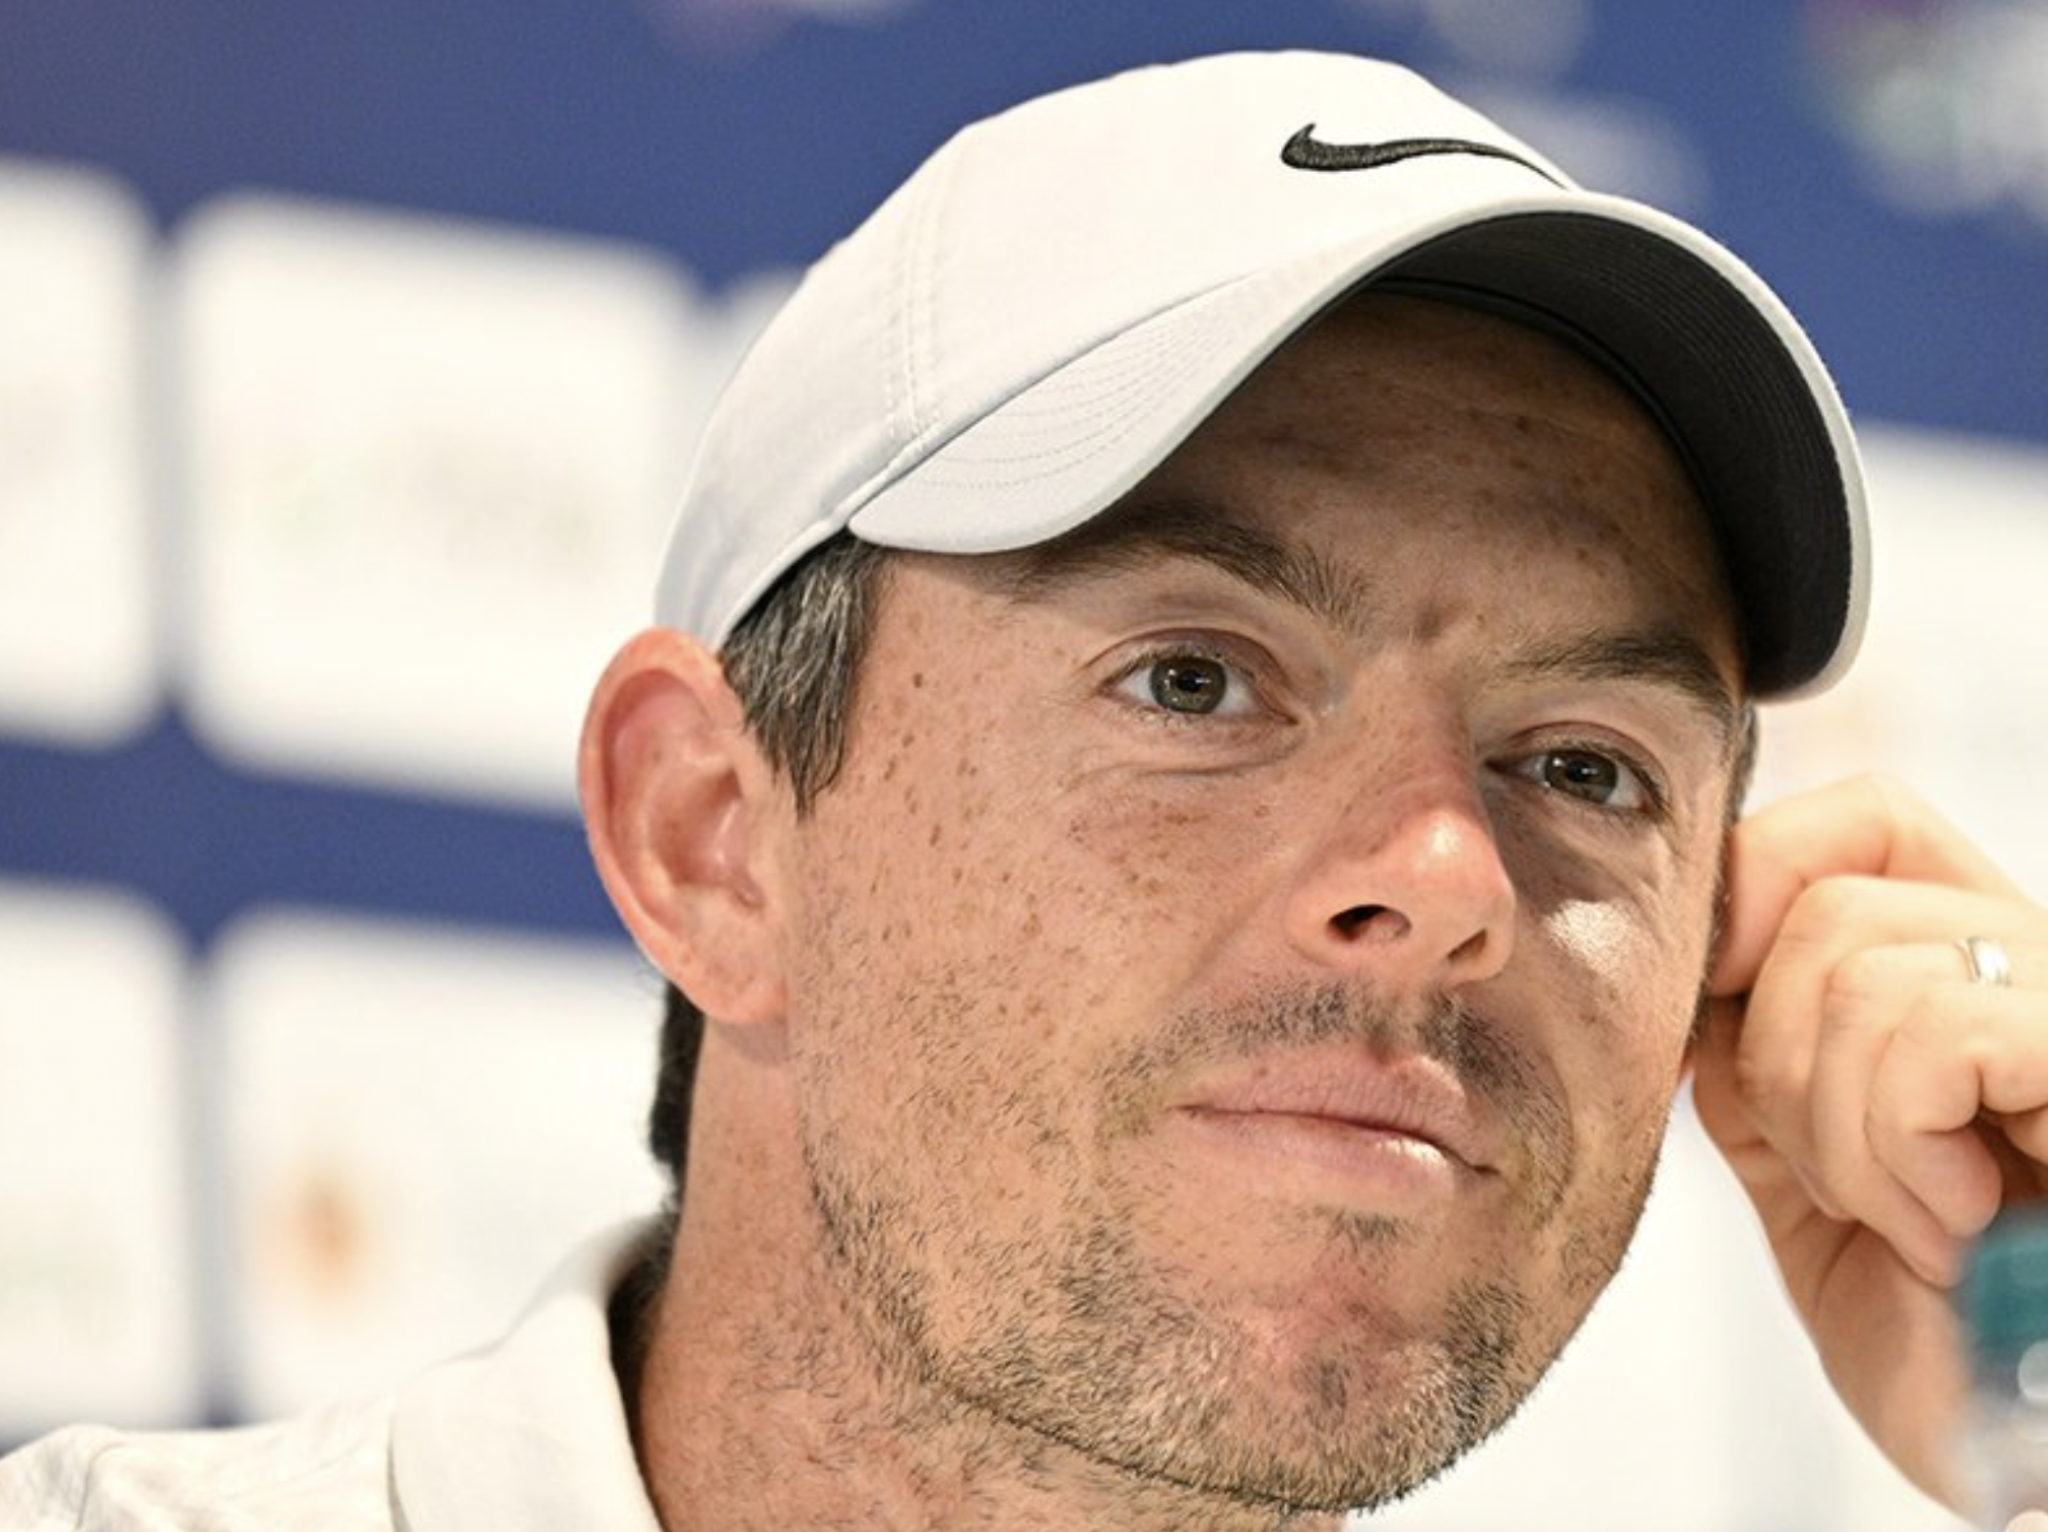 Baby news has caused my mind to wander, says Rory McIlroy